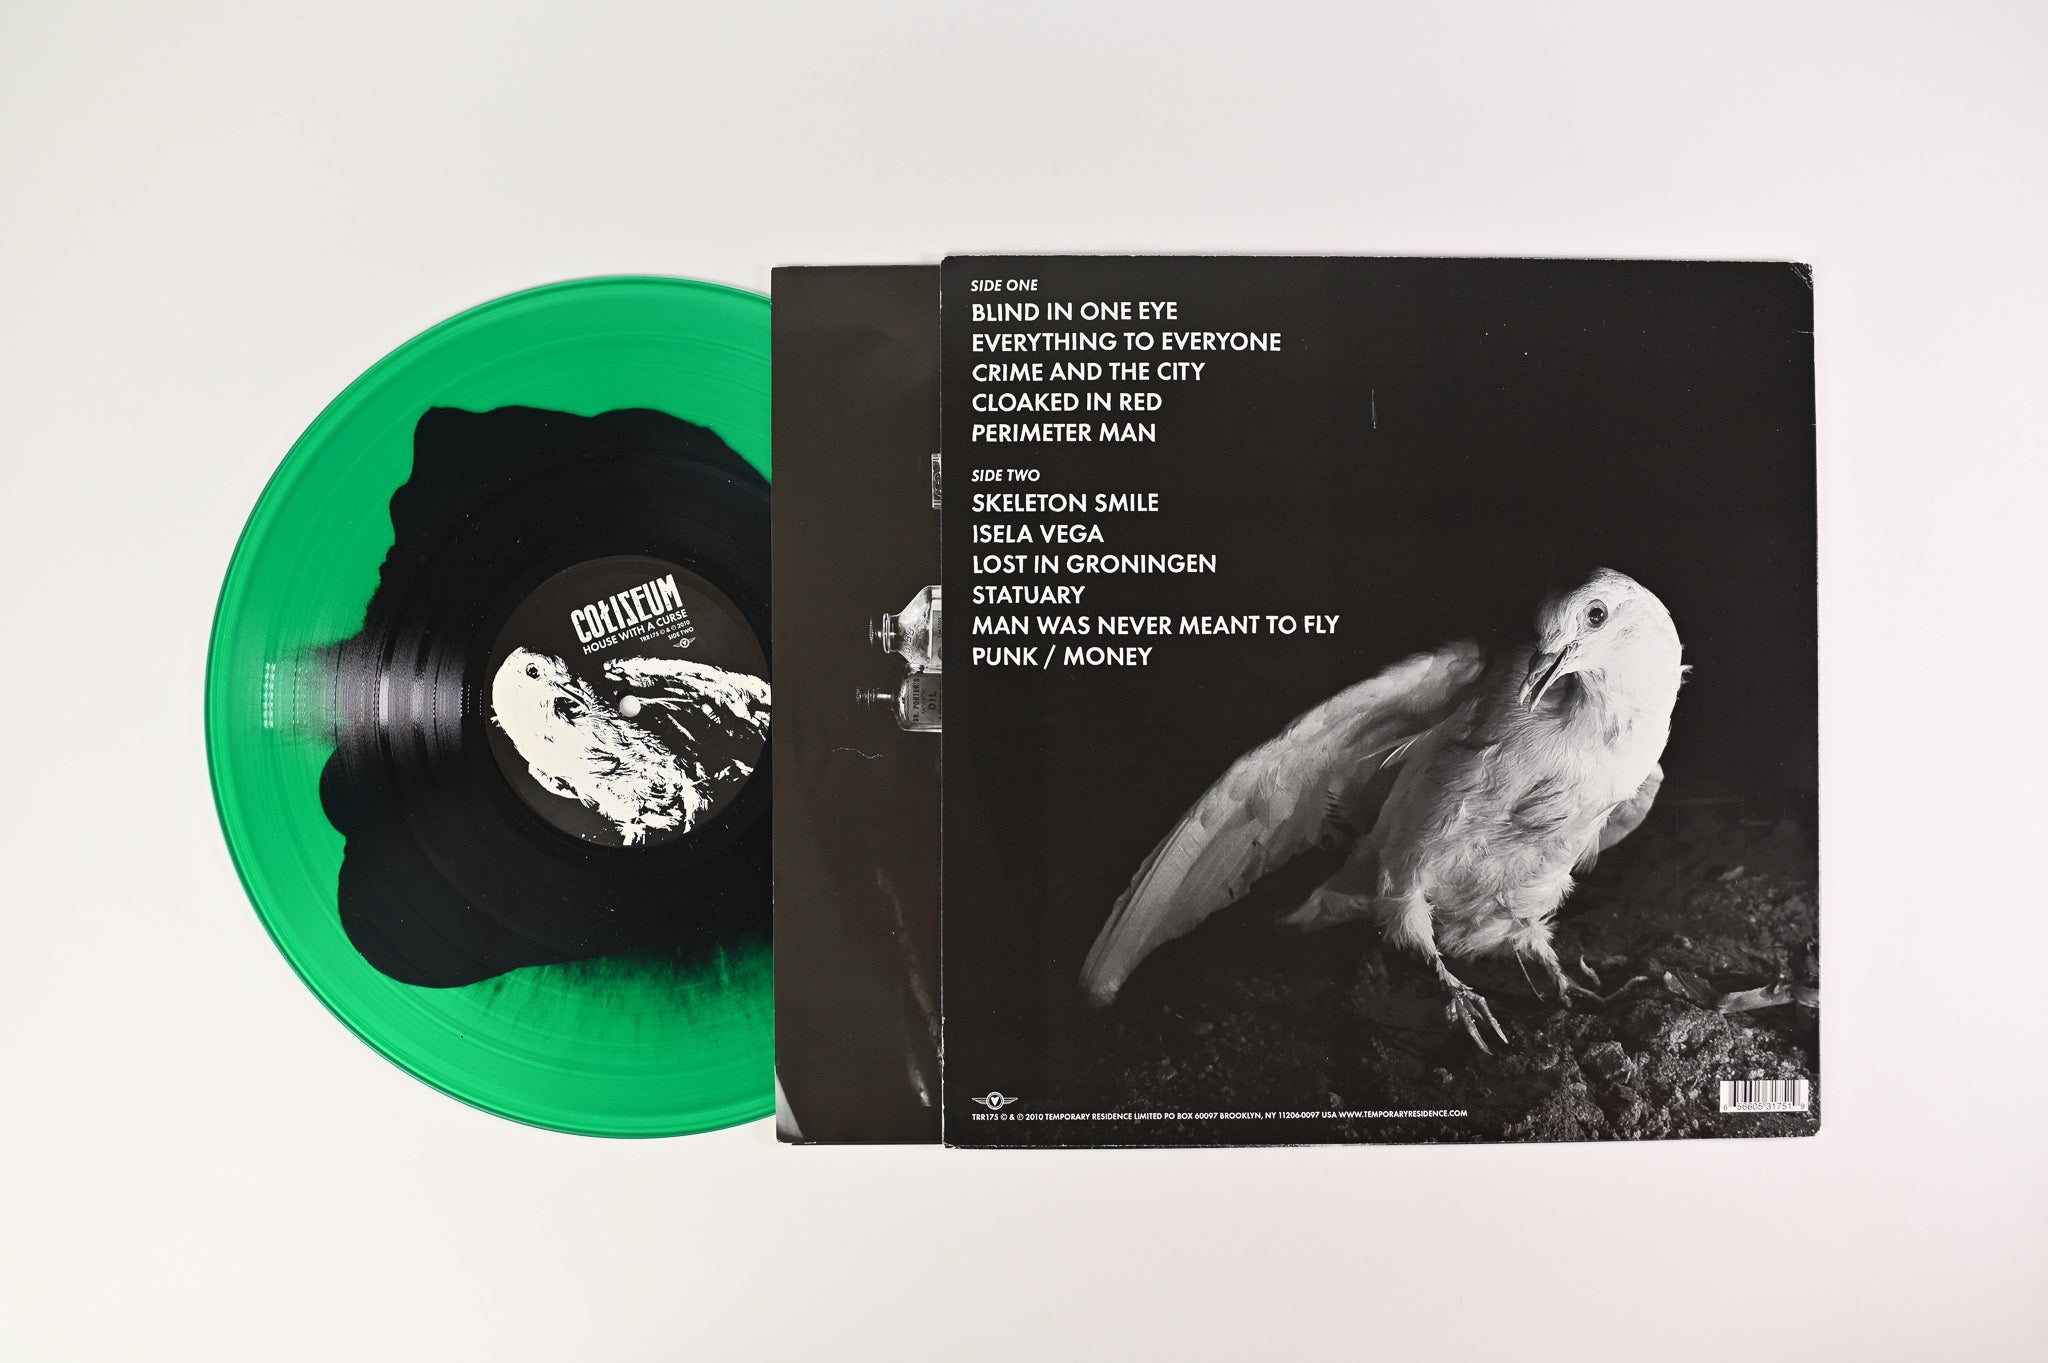 Coliseum - House With A Curse on Temporary Residence Green with Black Haze Vinyl